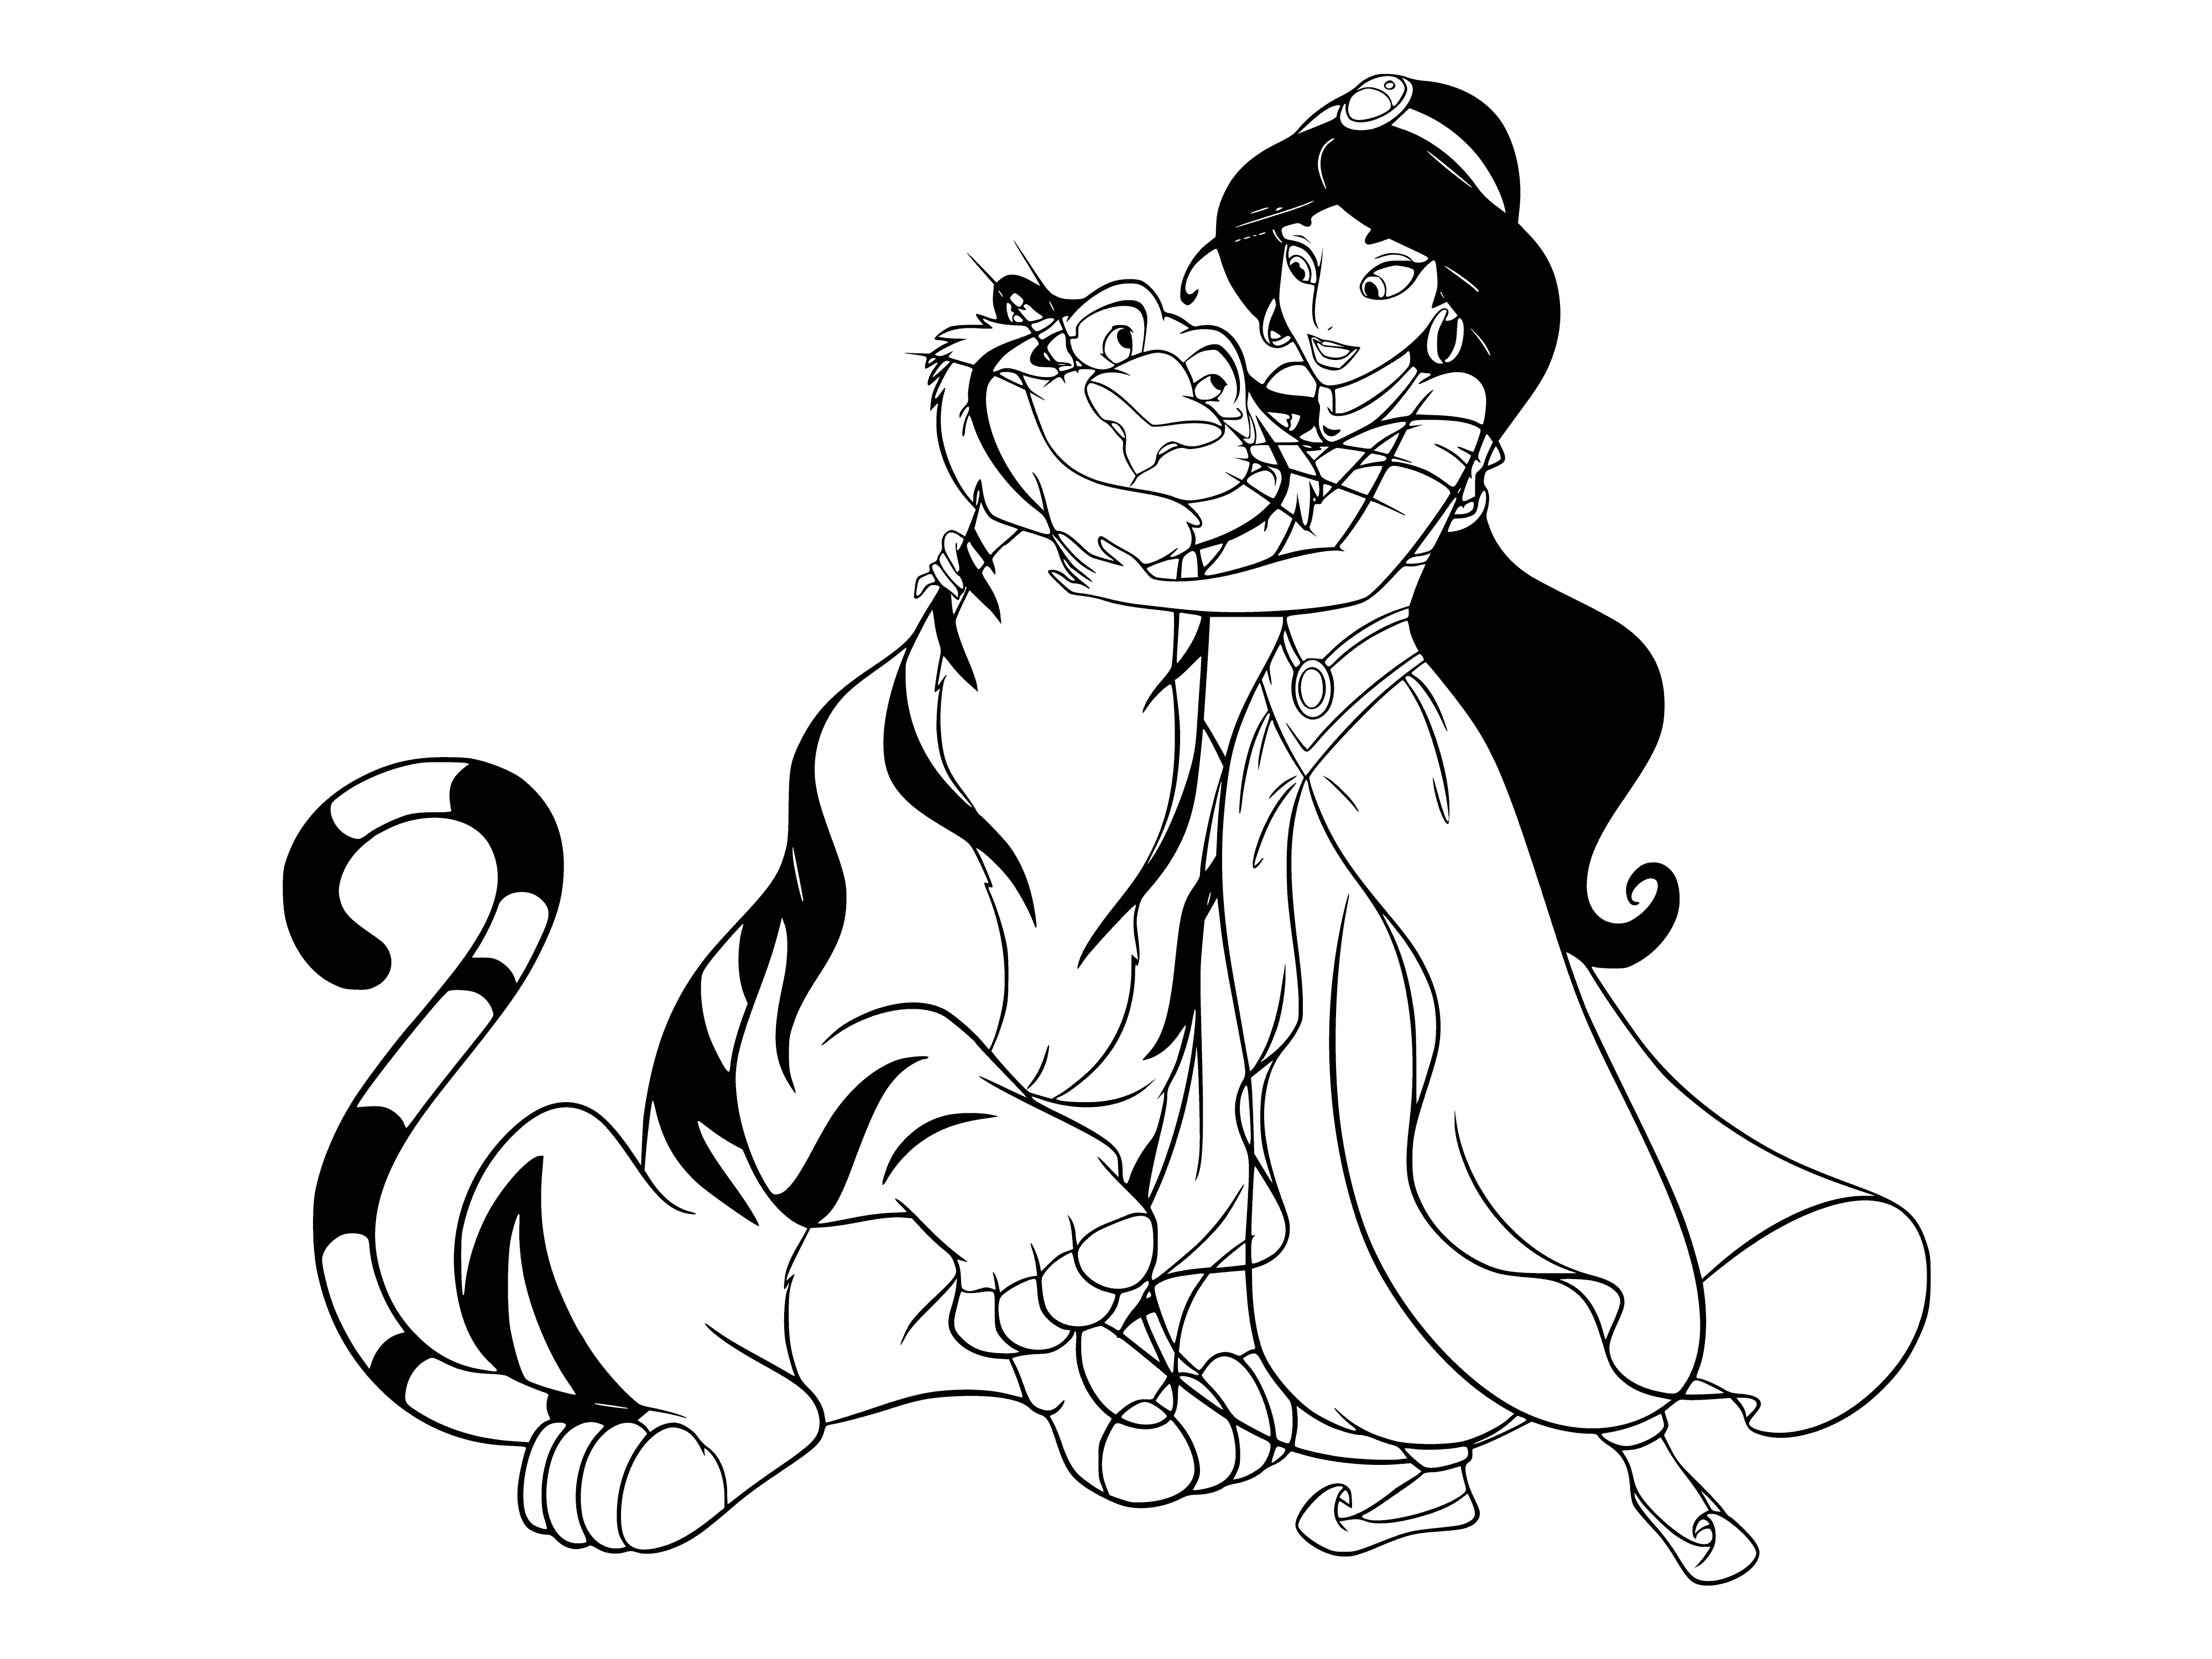 coloring page: Jasmine and Raja stand in front of a palace and desert, she in a purple outfit with gold accents and Raja with a gold collar. #Disney #Aladdin